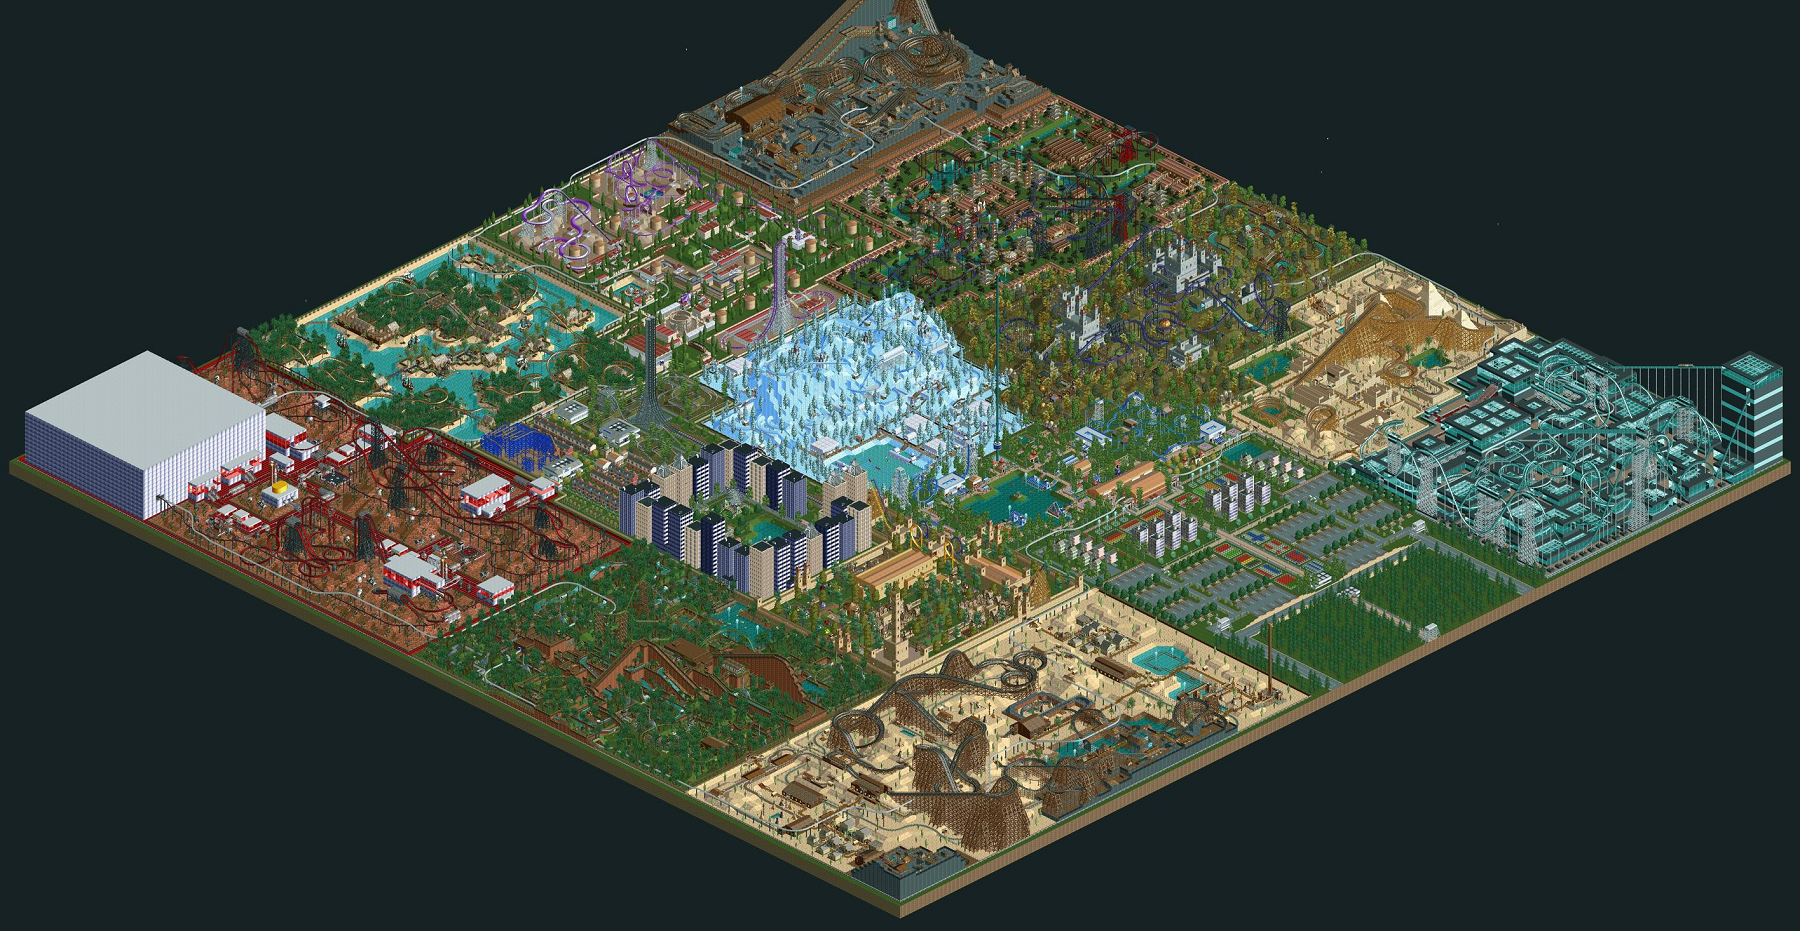 Player Spends A Decade Polishing Epic Theme Park In Rollercoaster Tycoon 2 